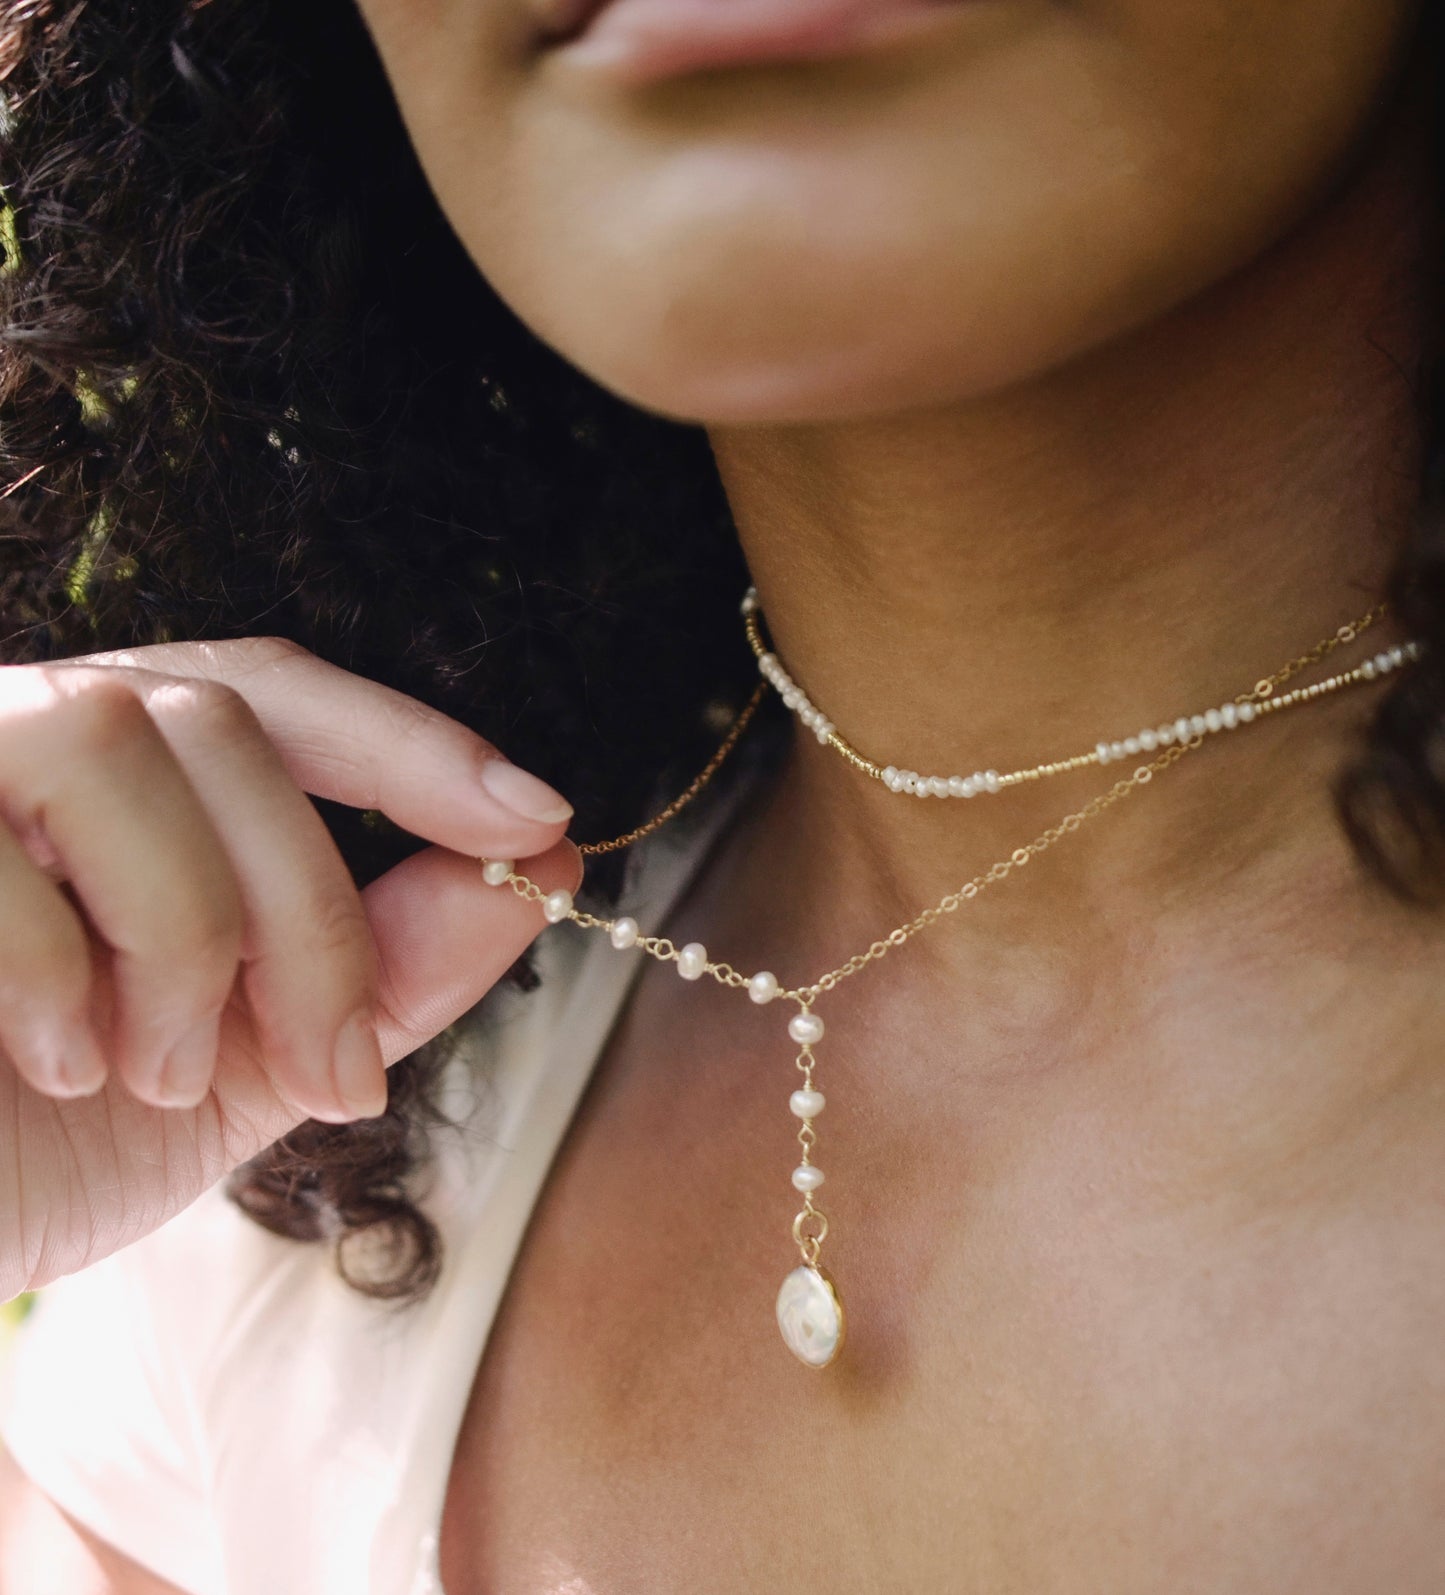 White freshwater pearl necklace with a large coin pearl pendant. Pearls fill one side of the necklace, while the other side is a dainty gold chain. Modeled image.